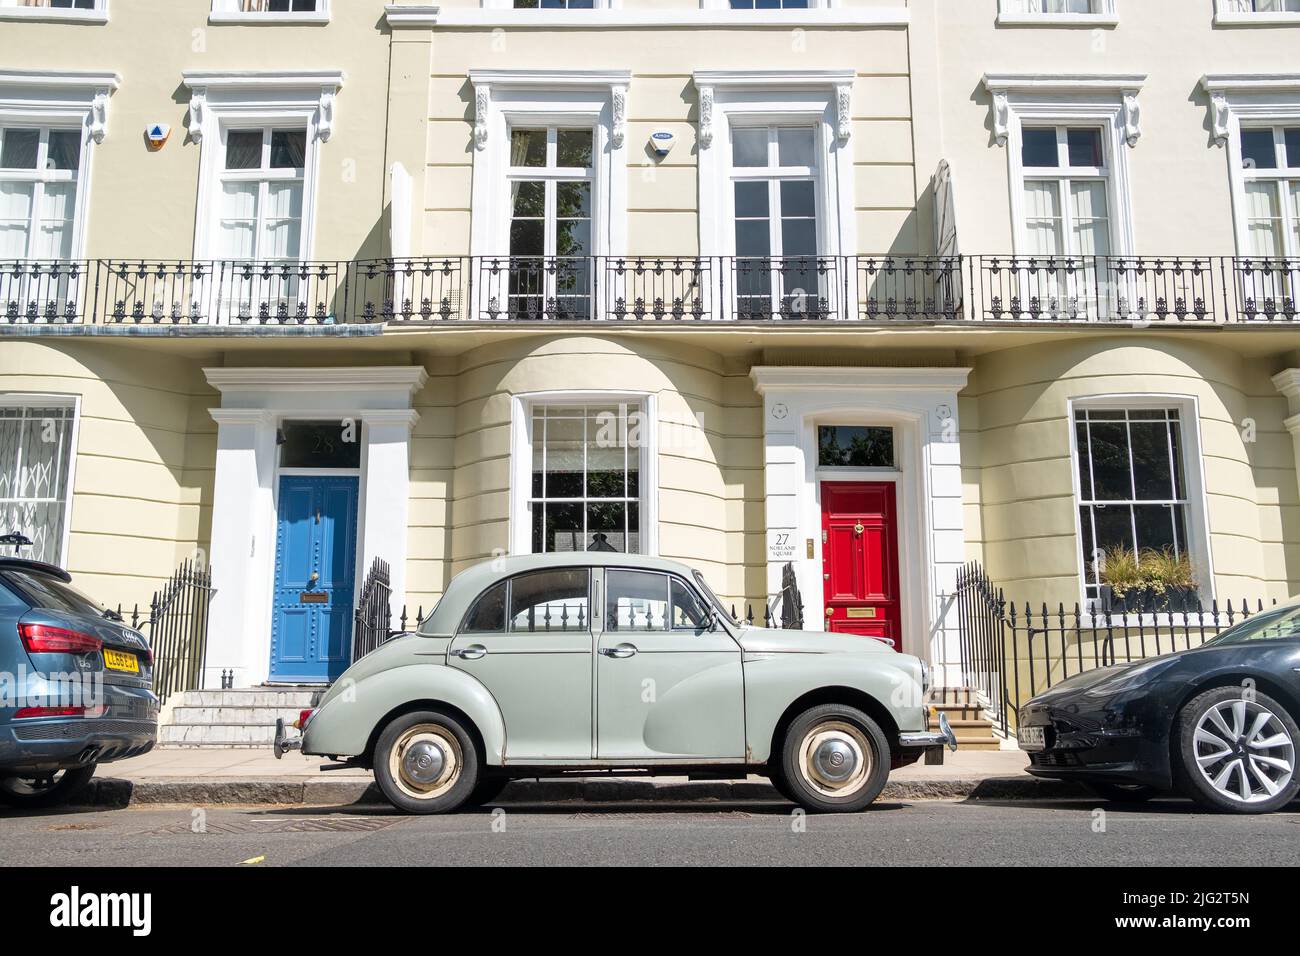 London- June 2022: Street of London townhouses in Notting Hill area of West London Stock Photo